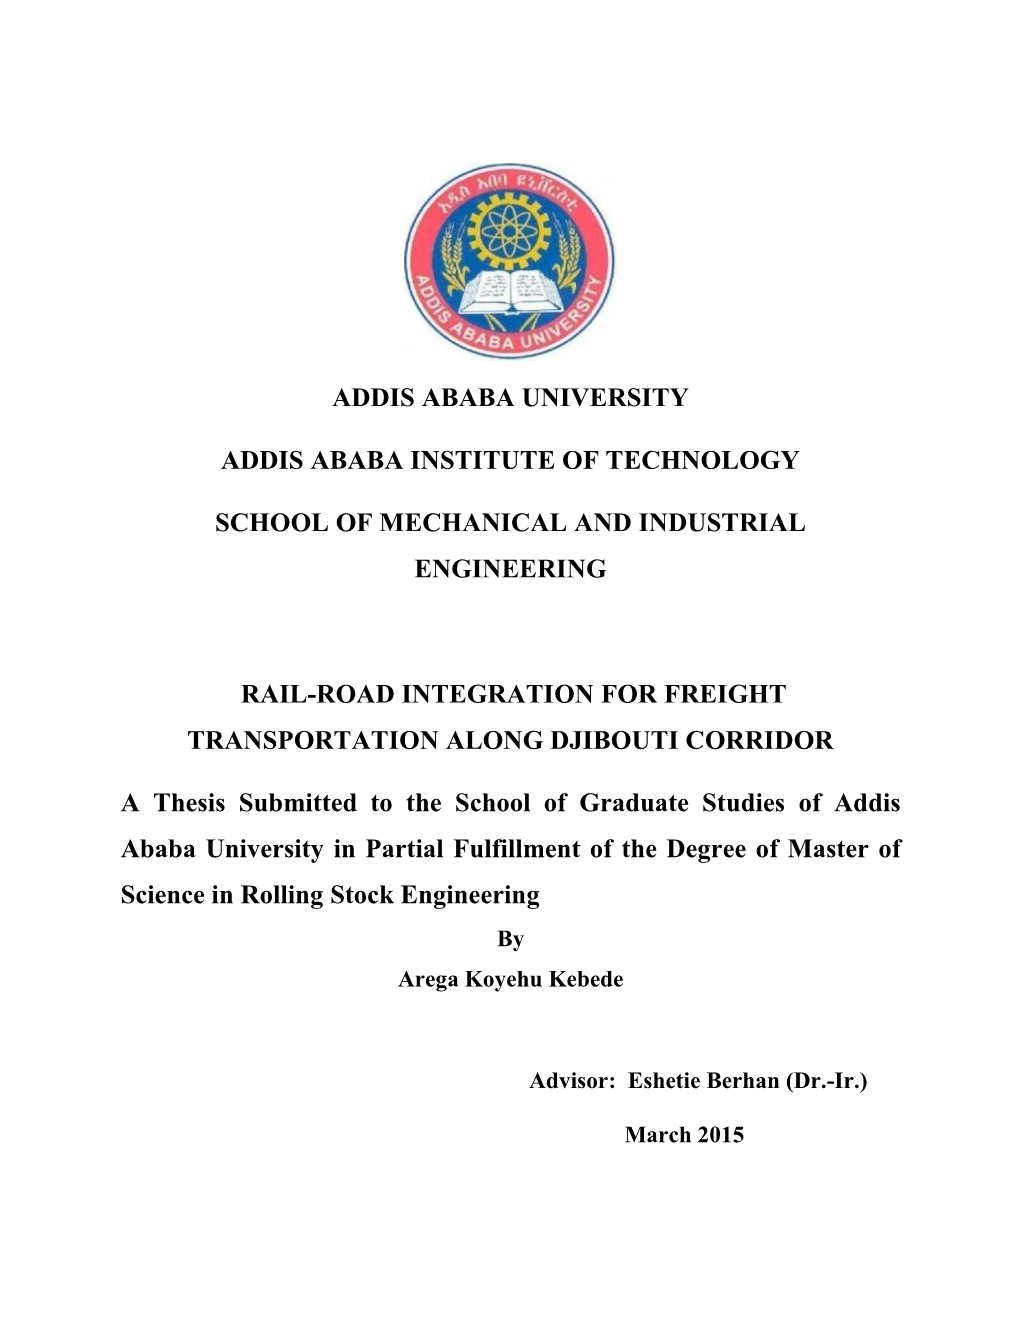 Addis Ababa University Addis Ababa Institute of Technology School of Mechanical and Industrial Engineering Rail-Road Integration